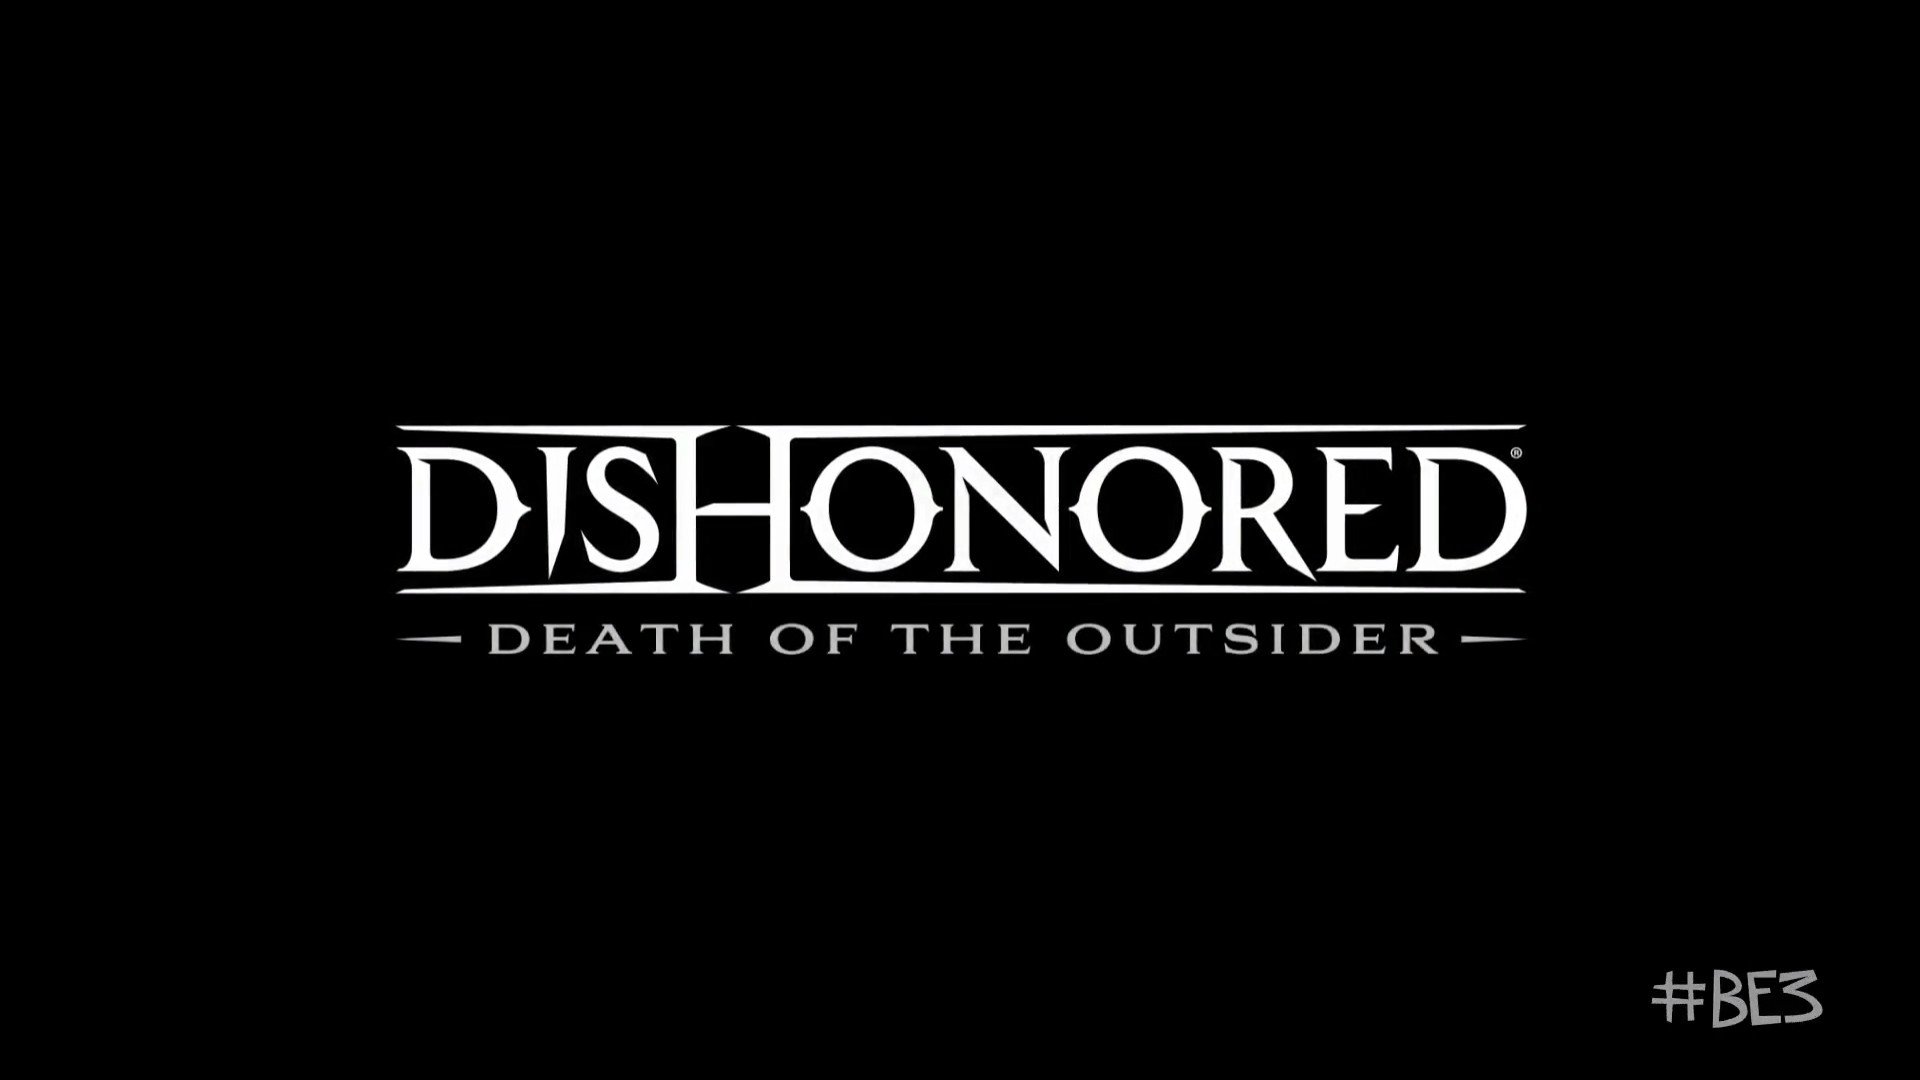 Dishonored DOUO 4